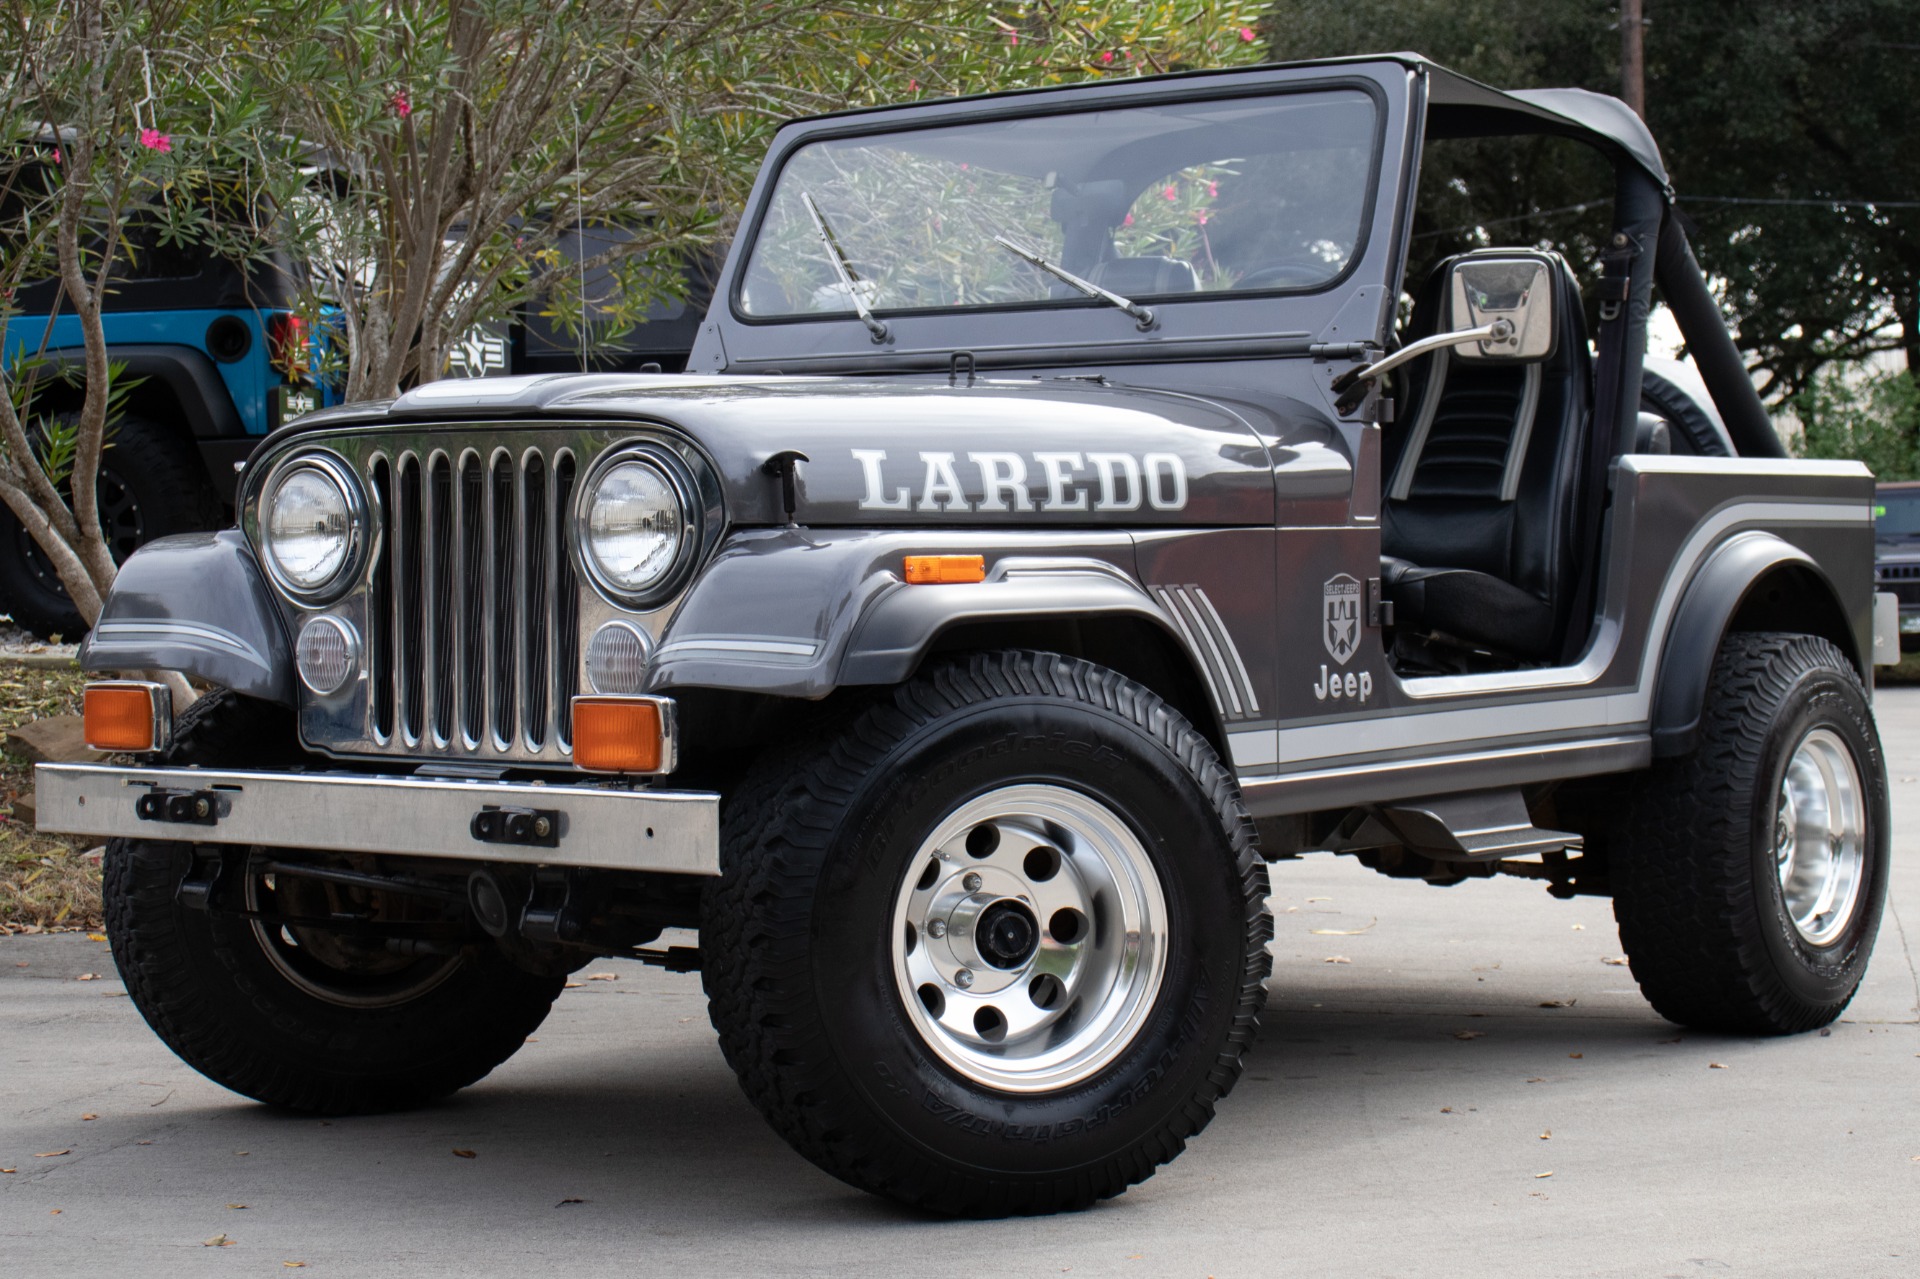 Used 1986 Jeep CJ-7 For Sale ($26,995) | Select Jeeps Inc. Stock #087522